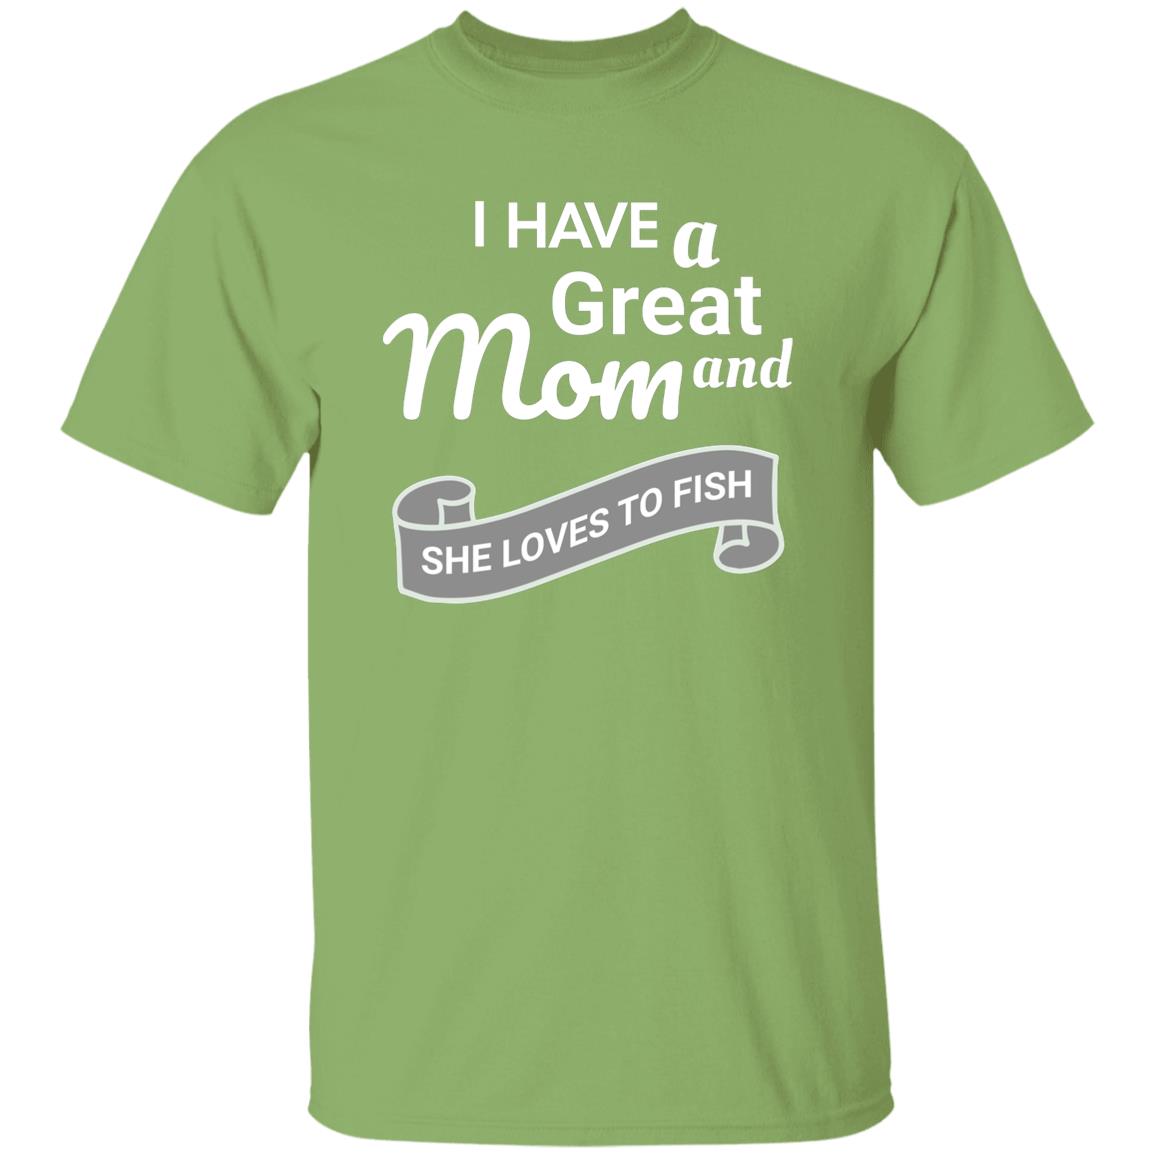 I have a great mom and she loves to fish t-shirt k kiwi